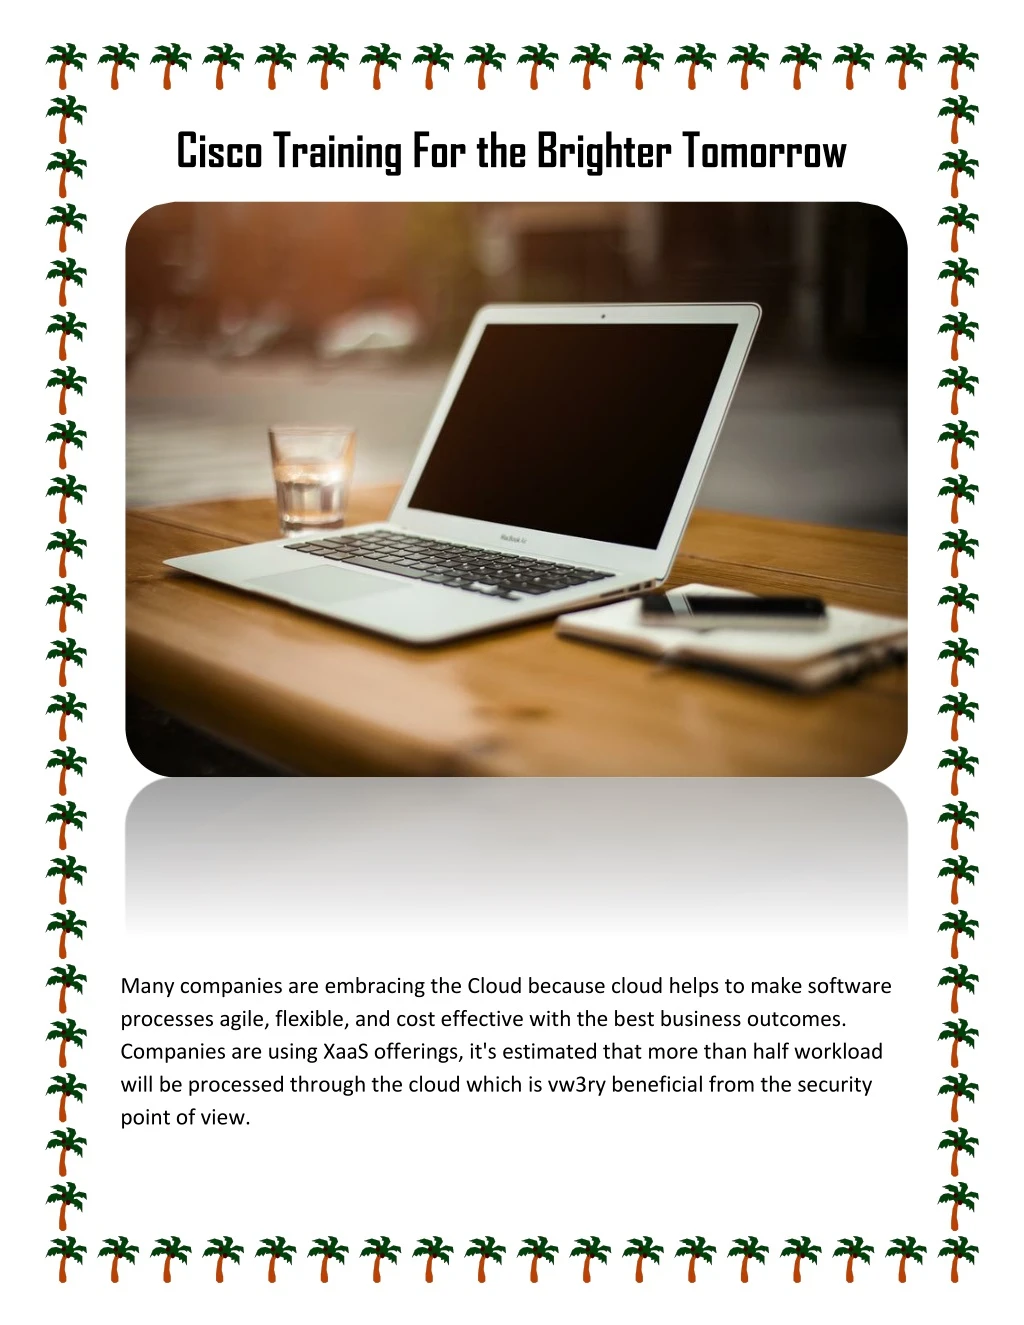 cisco training for the brighter tomorrow